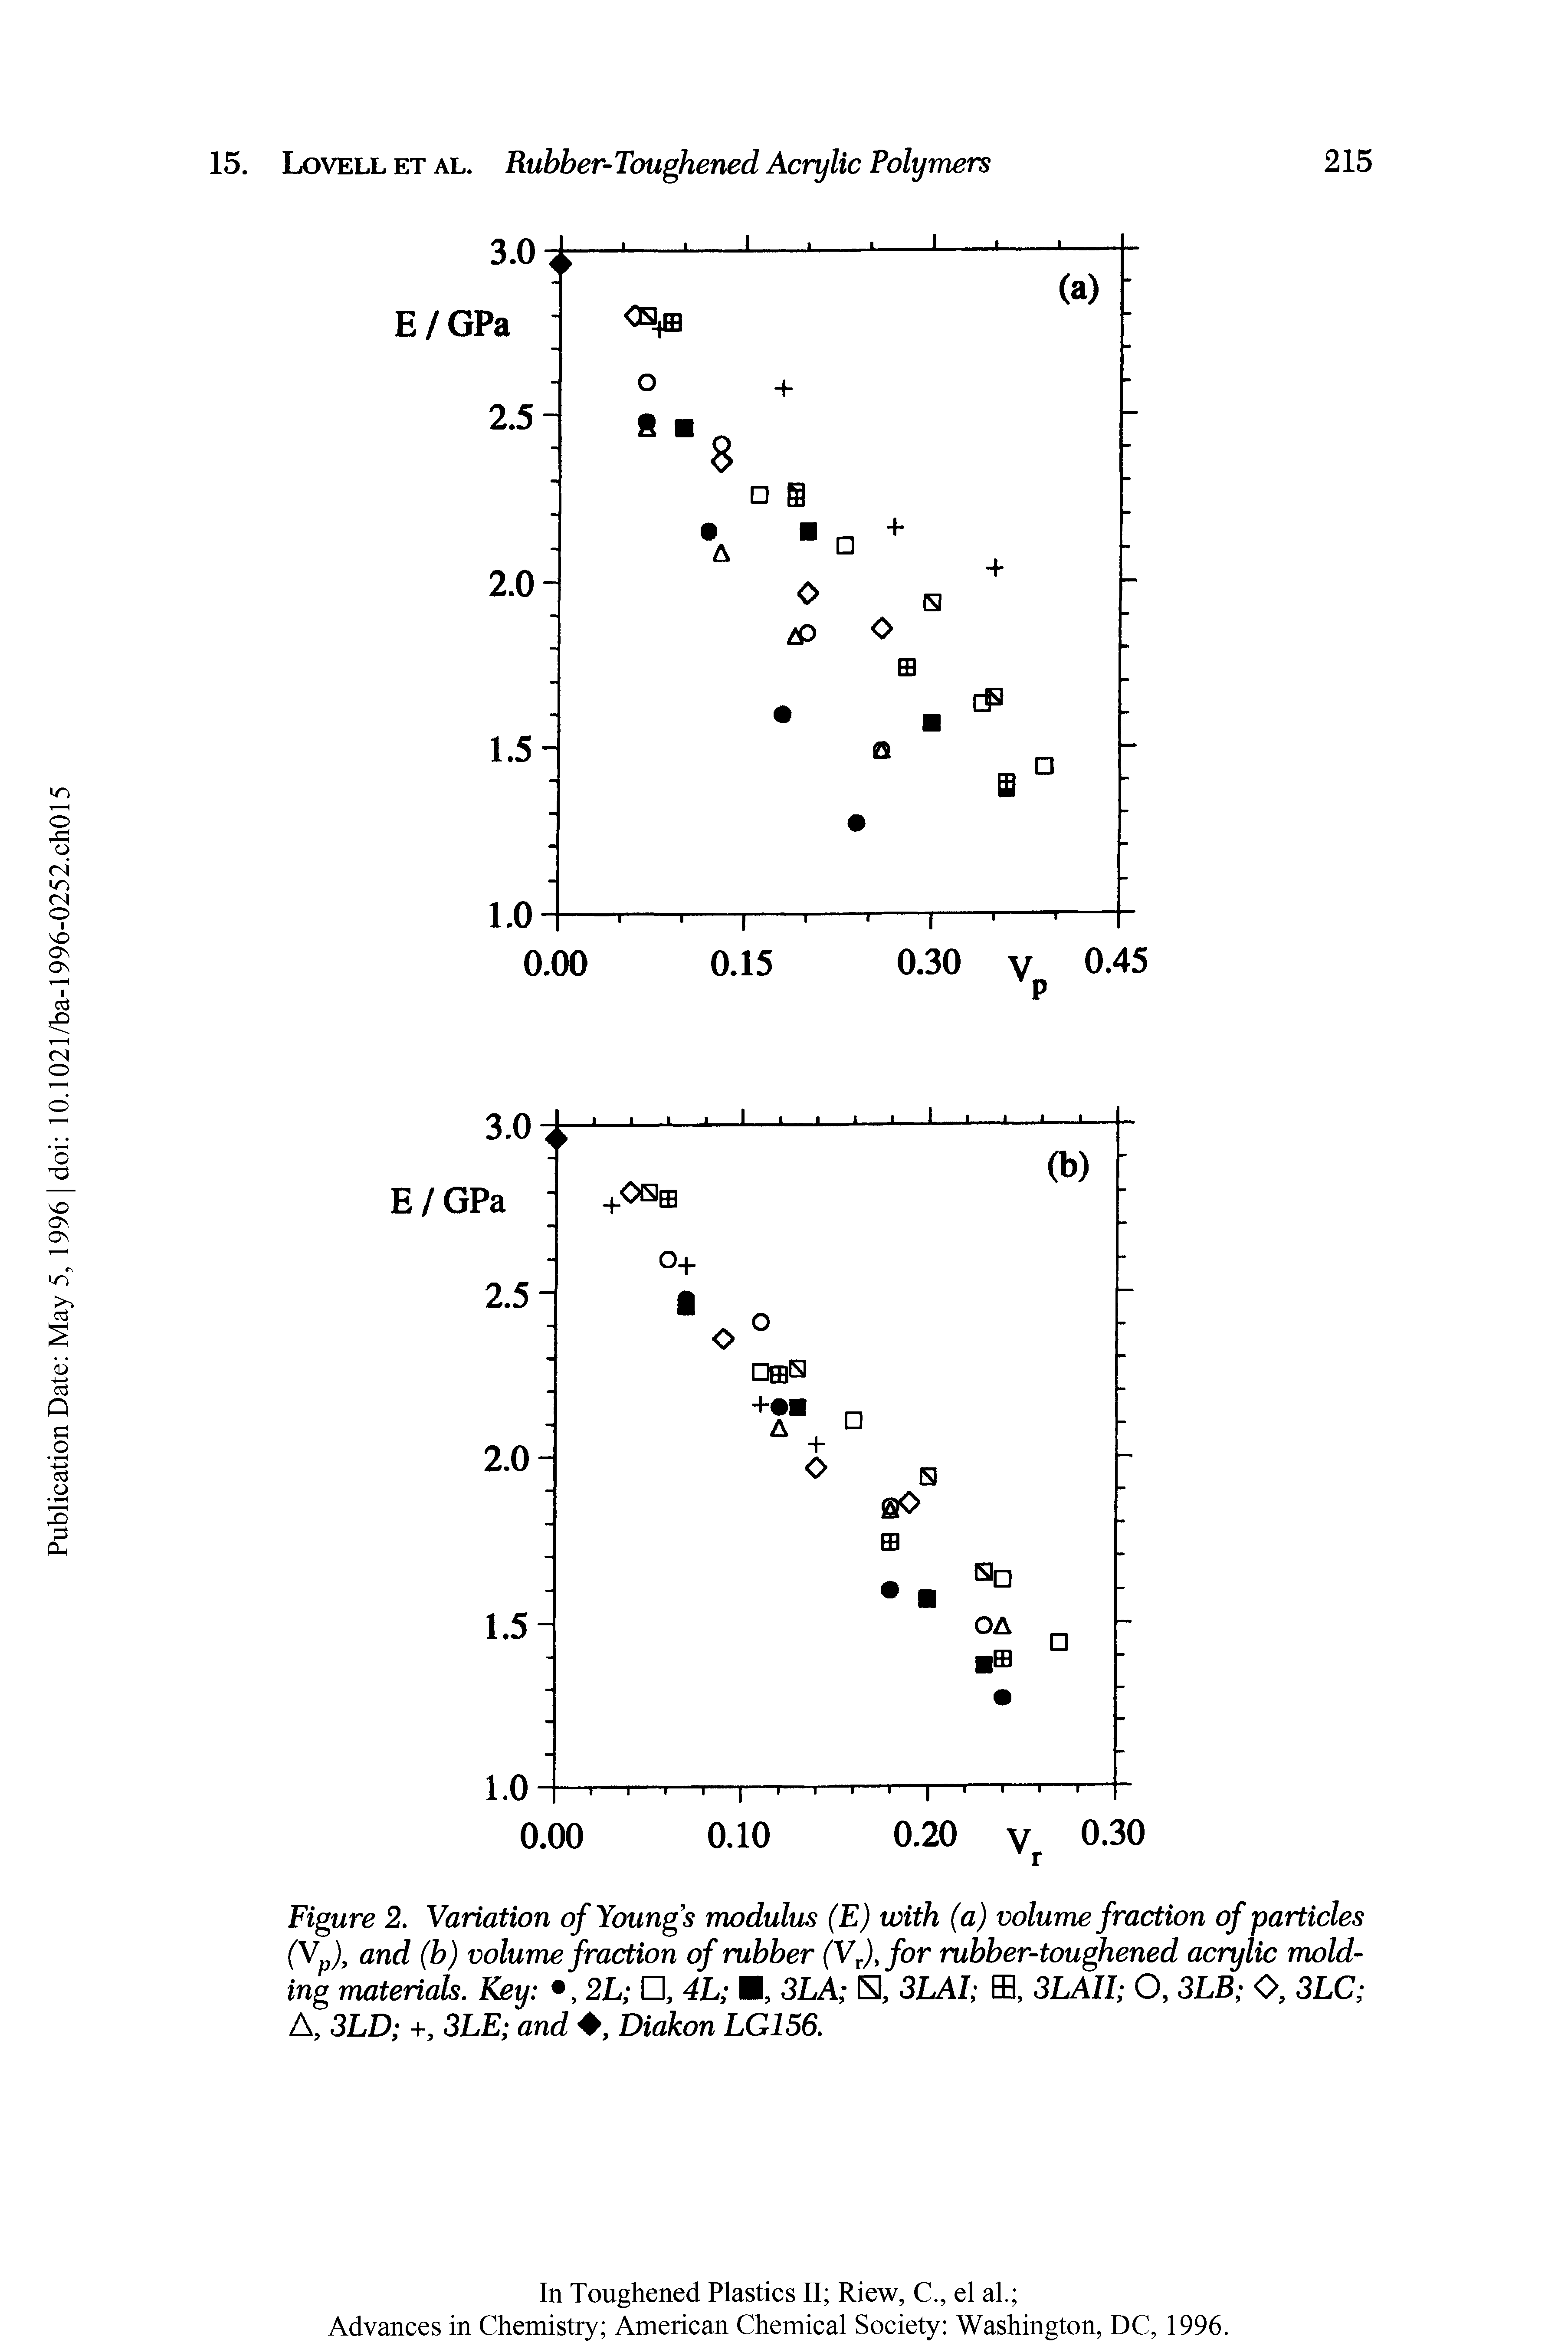 Figure 2. Variation of Youngs modulus (E) with (a) volume fraction of particles (Vp), and (b) volume fraction of rubber (VT),for rubber-toughened acrylic molding materials. Key , 2L , 4L , 3LA E, 3LAI ffl, 3LAII O, 3LB O, 3LC A, 3LD +, 3LE and , Diakon LG156.